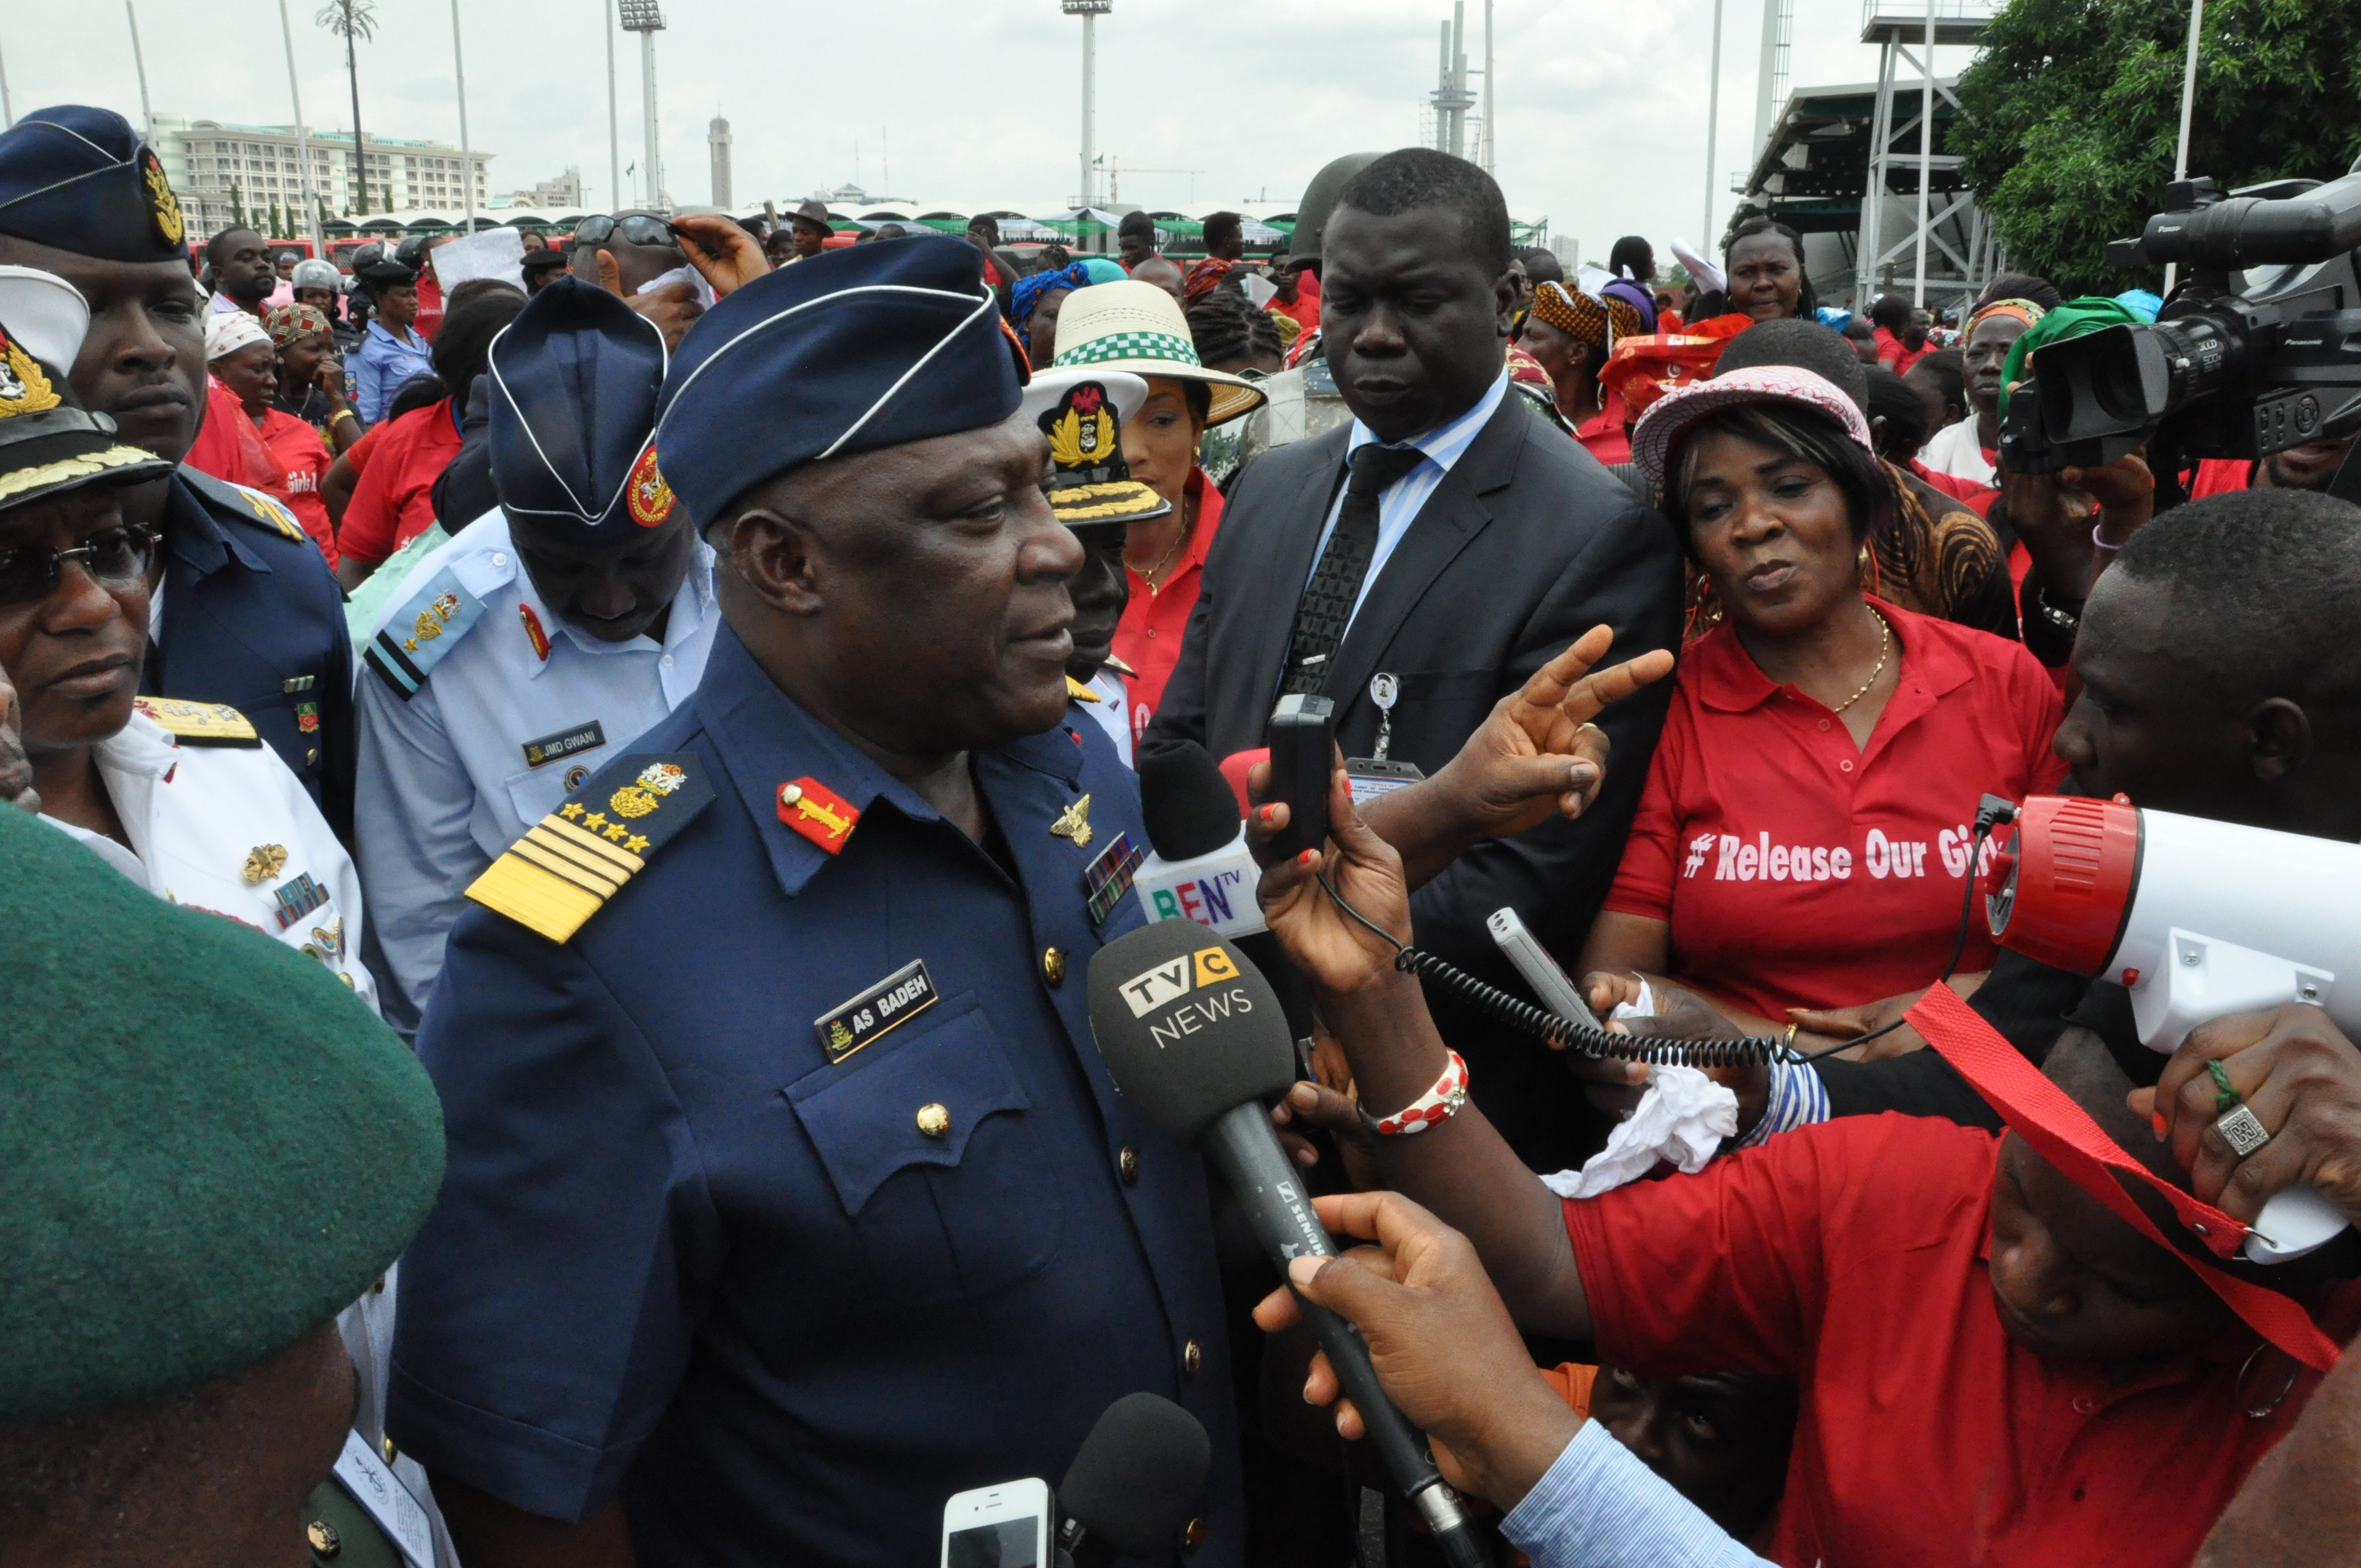 Nigeria defence chief Air Marshal Alex Badeh, center, speaks during a demonstration calling on the government to rescue the kidnapped schoolgirls on May 26, 2014, in the Nigerian capital, Abuja (Gbenga Olamikan—AP)